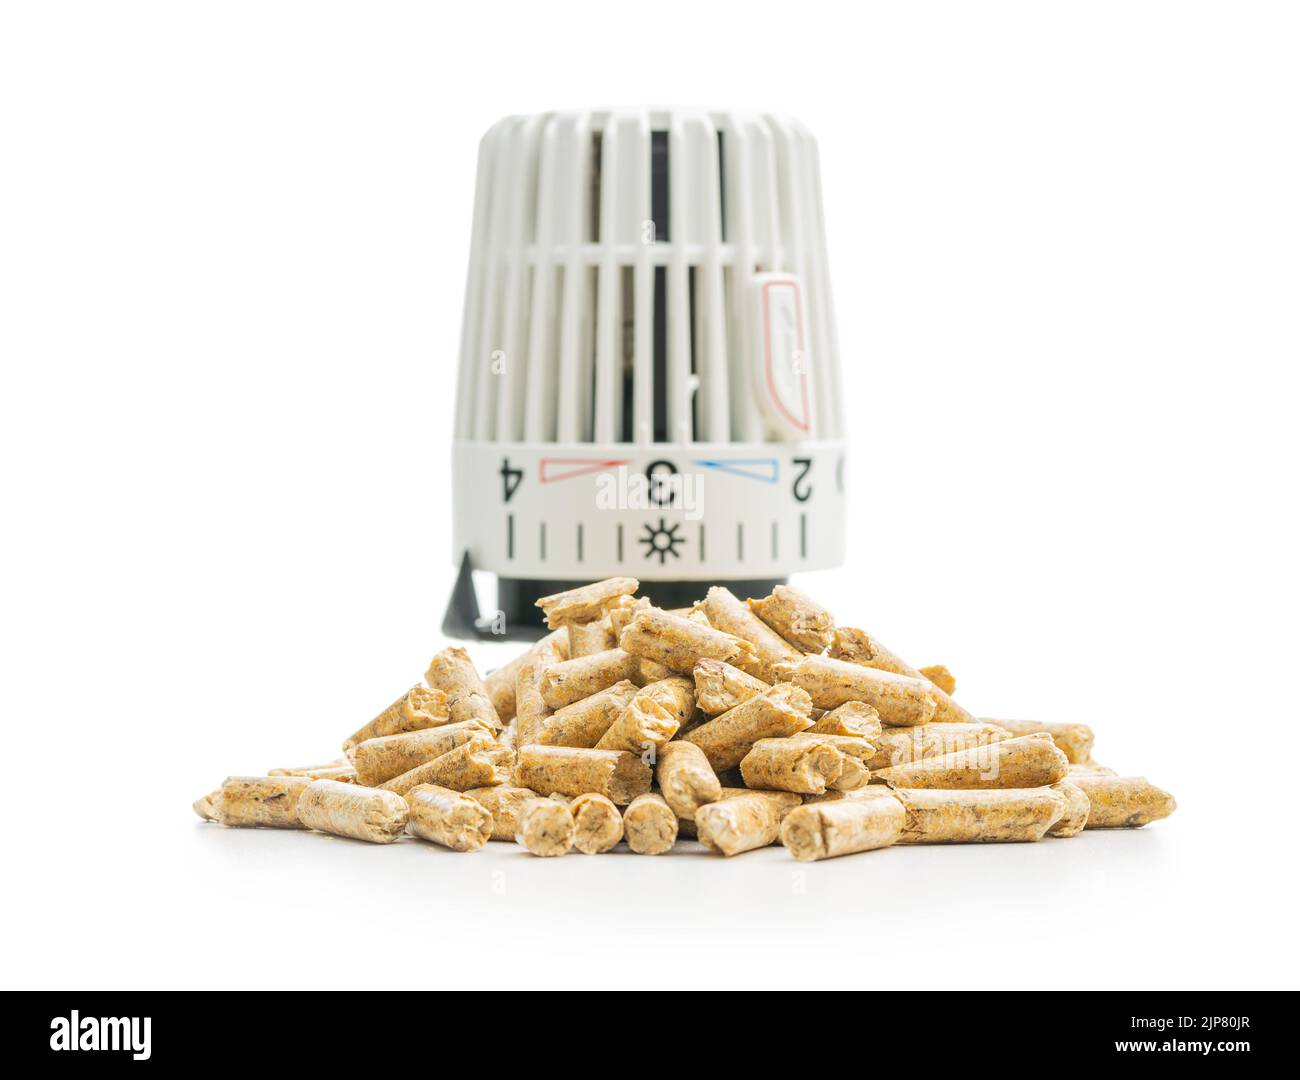 Wooden pellets and thermostatic valve head isolated on a white background. Biomass - Renewable source of heating. Stock Photo